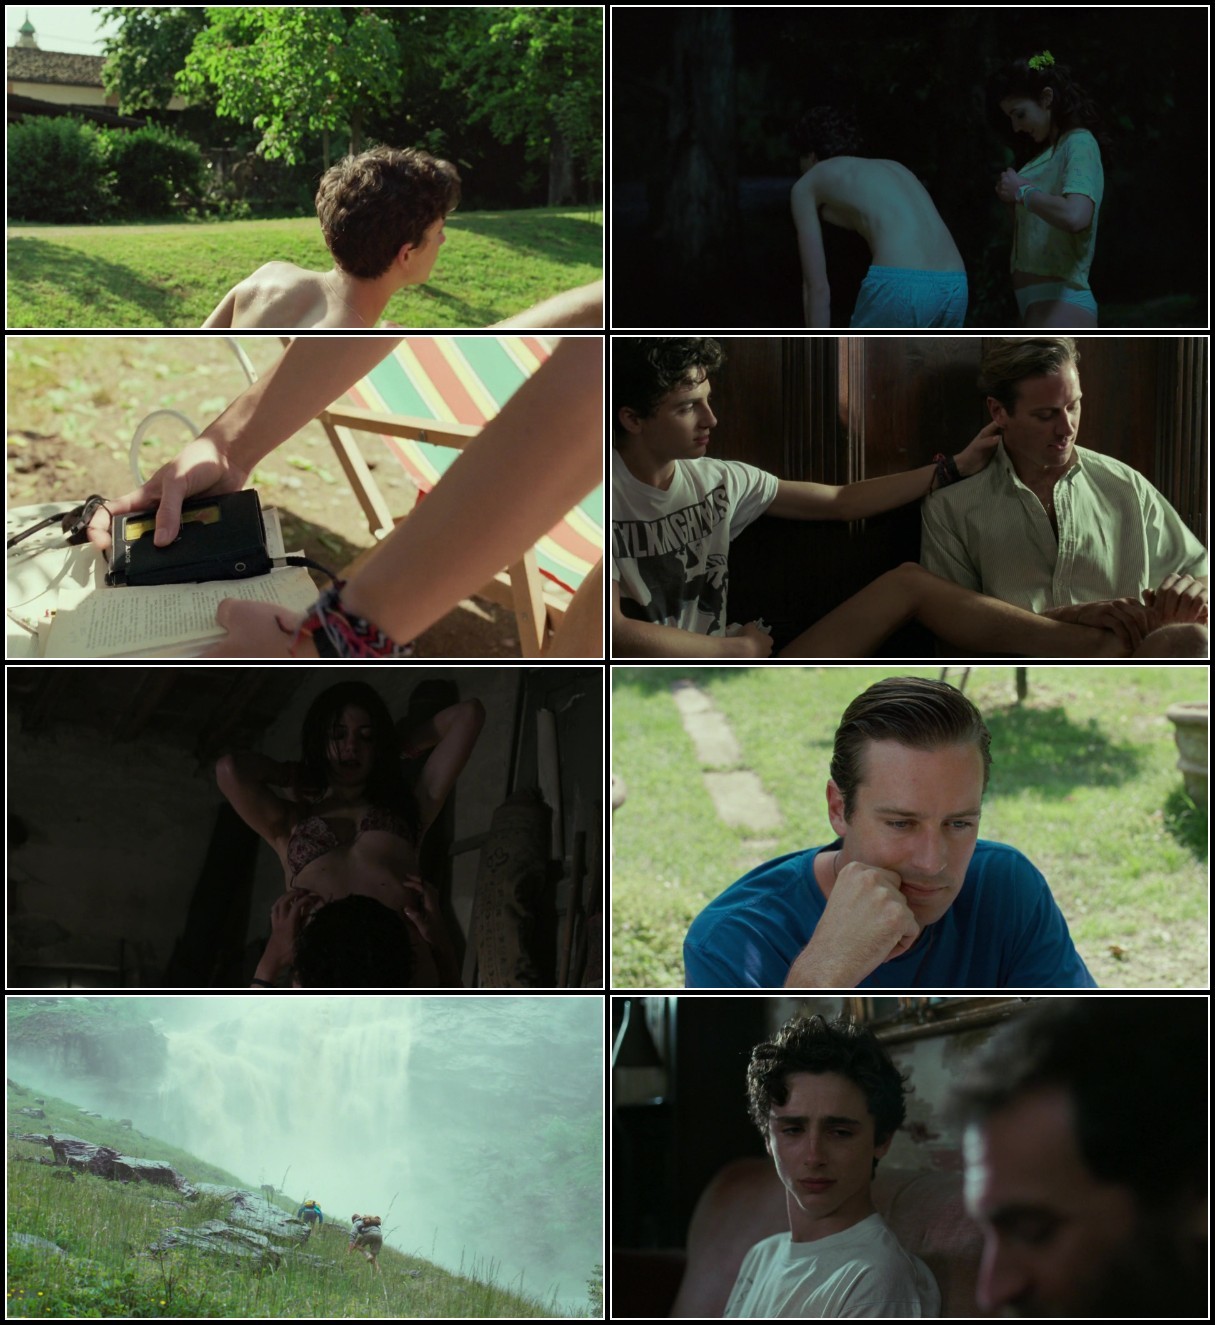 Call Me by Your Name (2017) 1080p BluRay H264 AAC-RARBG LXMkBPlJ_o